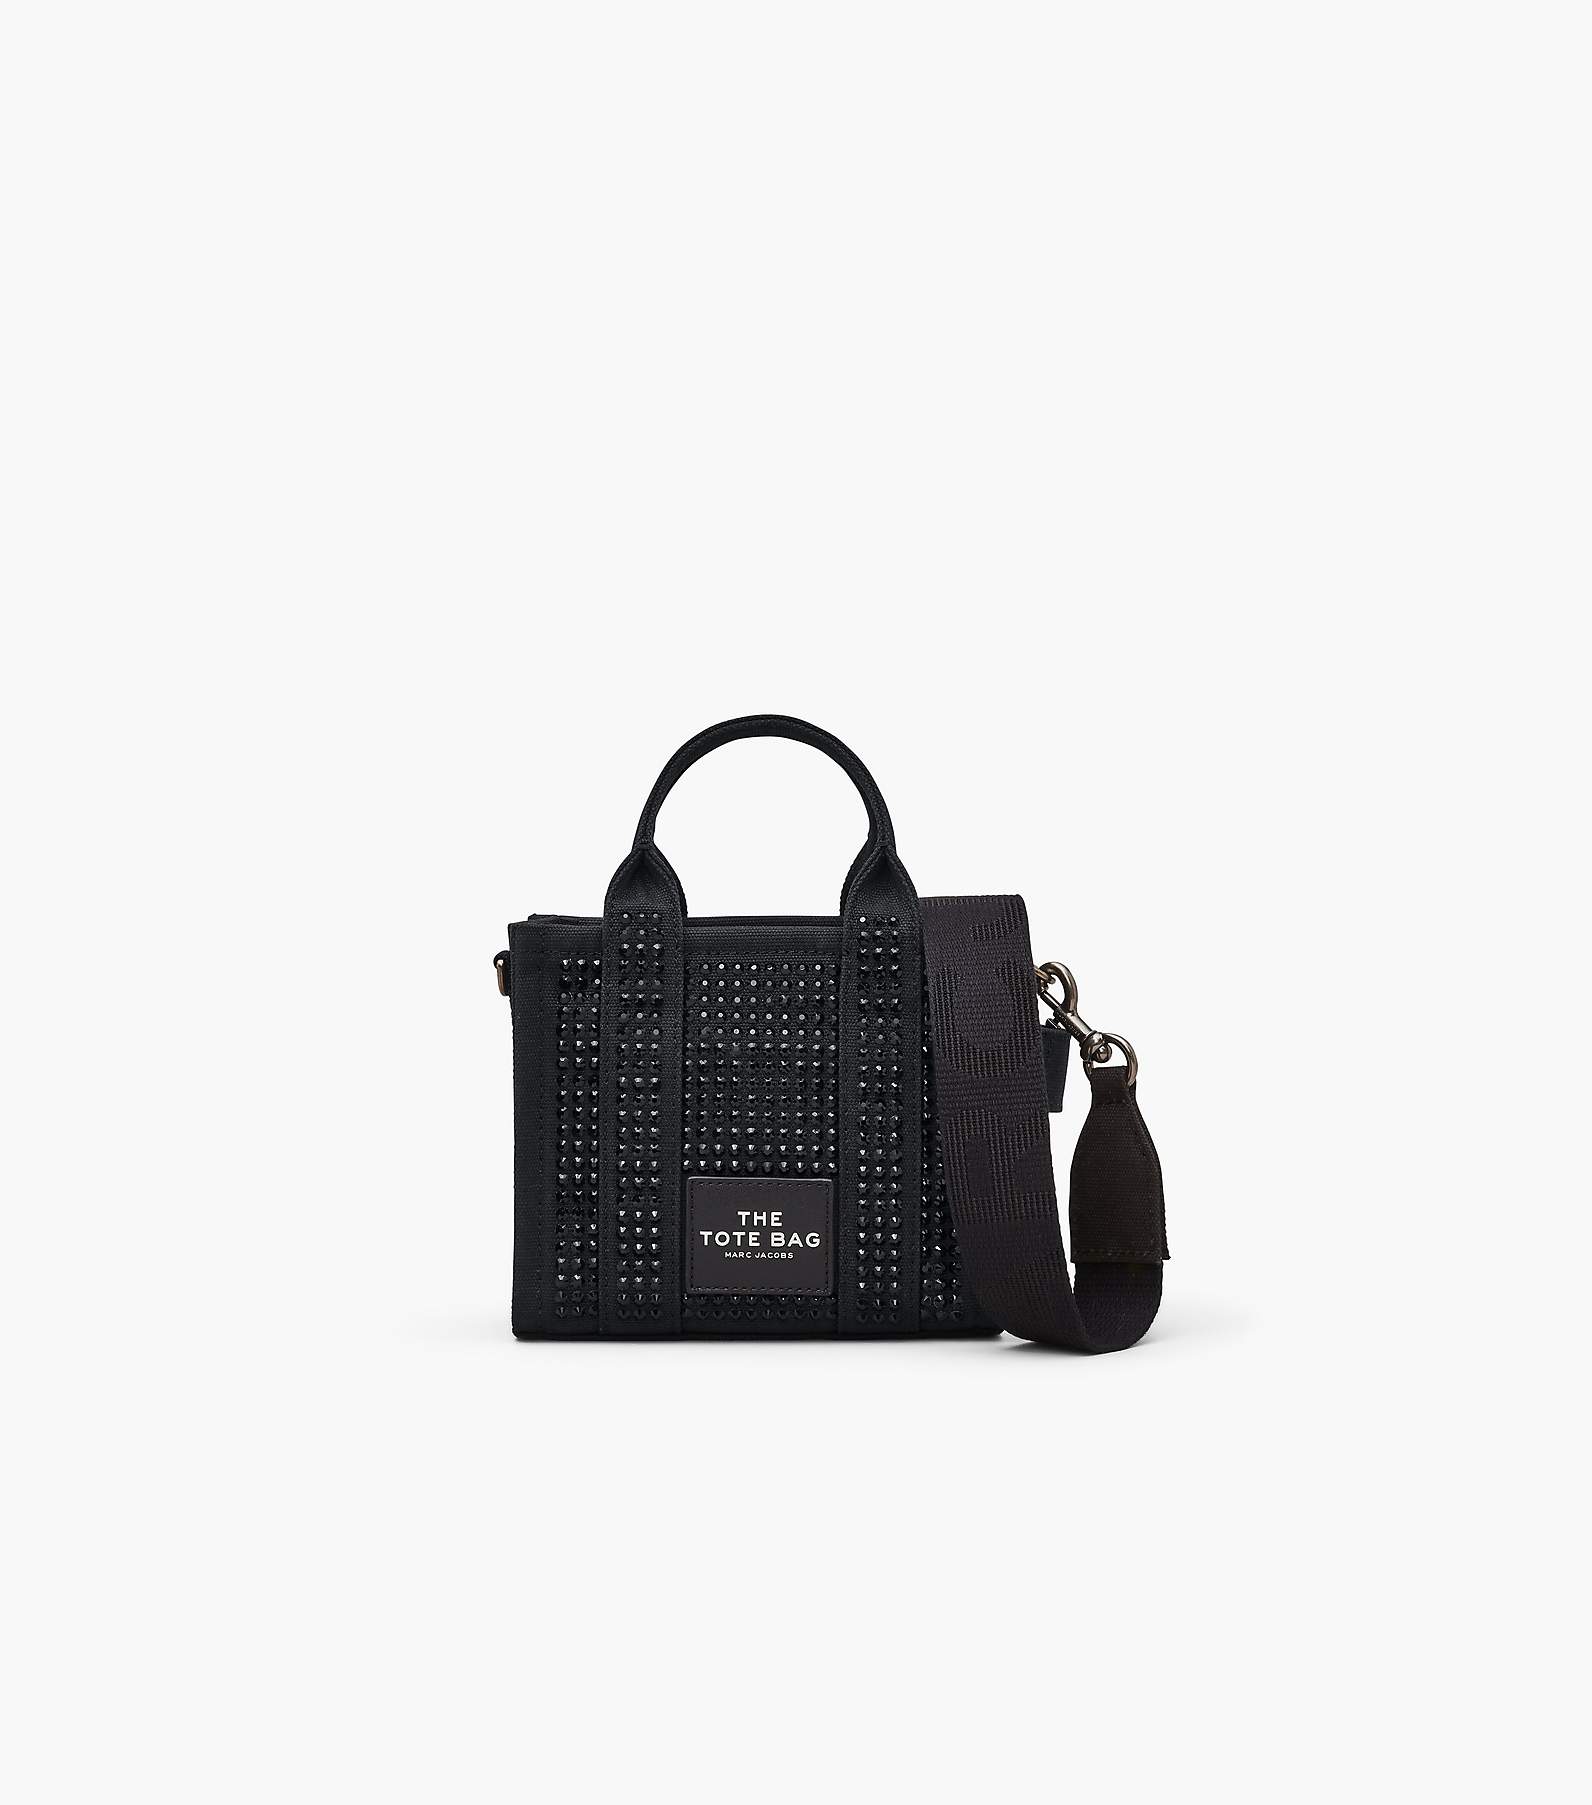 the small marc jacobs tote bag